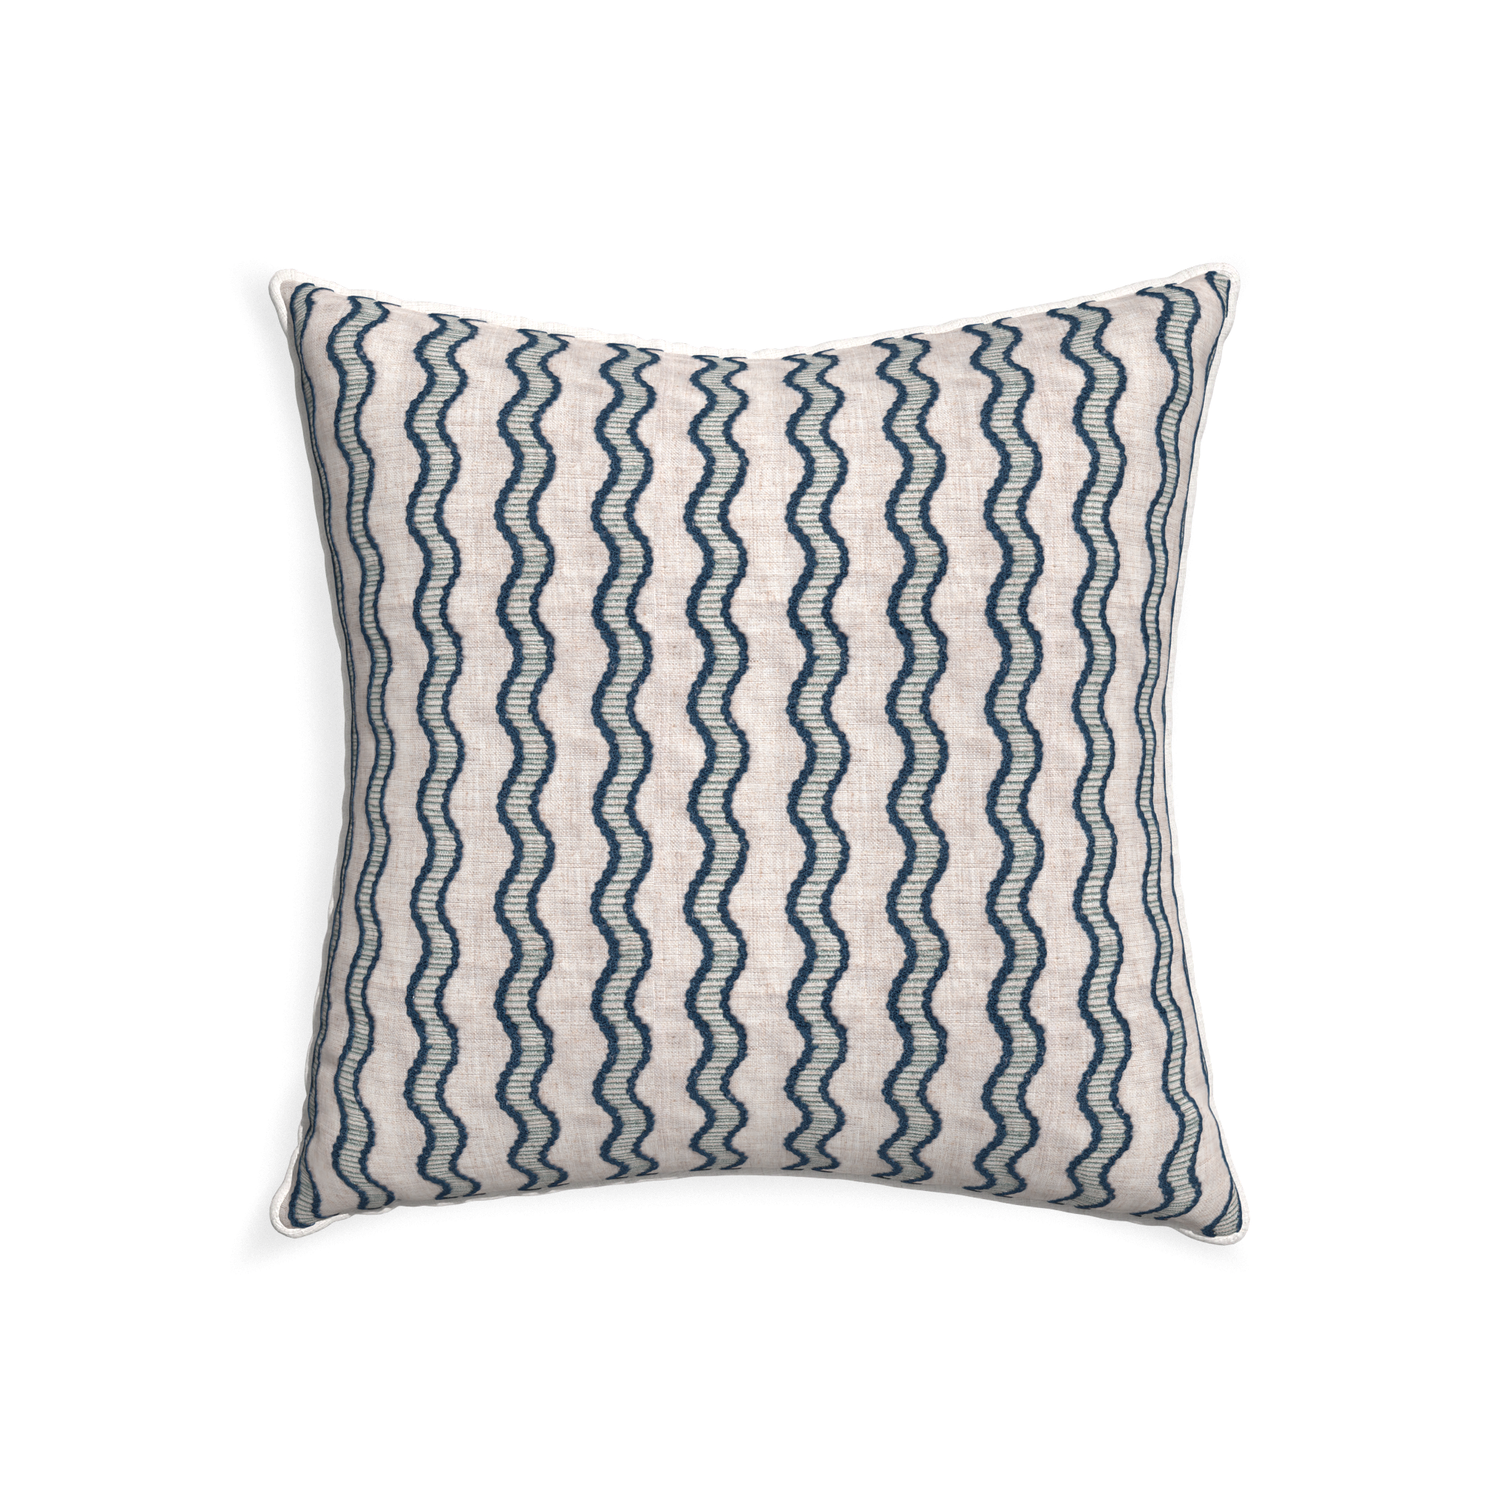 22-square beatrice custom embroidered wavepillow with snow piping on white background